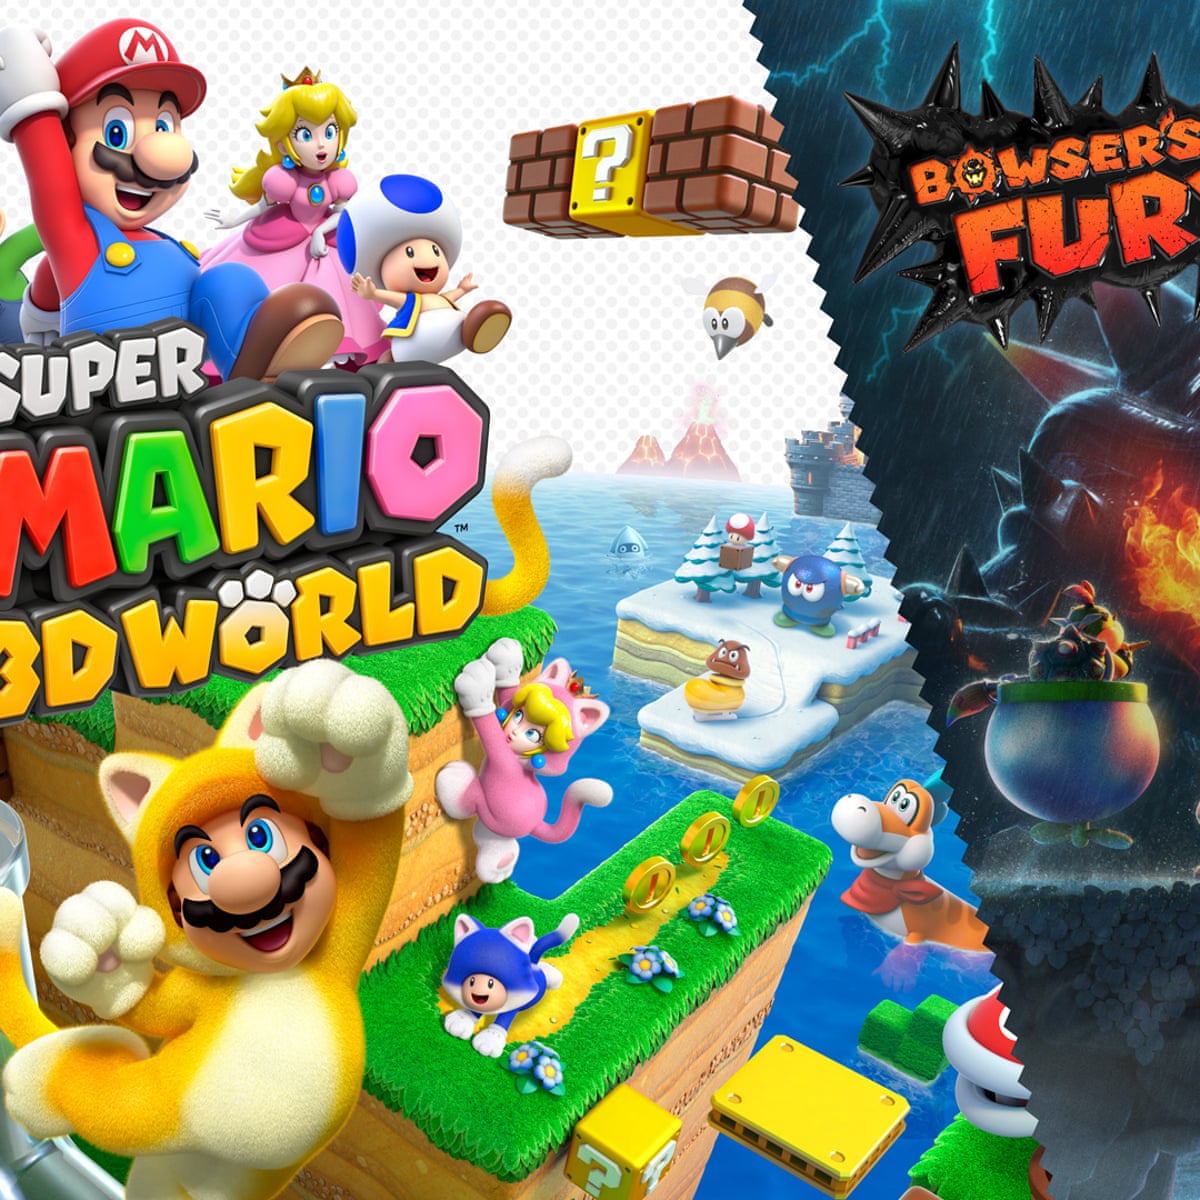 Super Mario 3D World + Bowser's Fury review – a never-ending fountain of fun  | Games | The Guardian